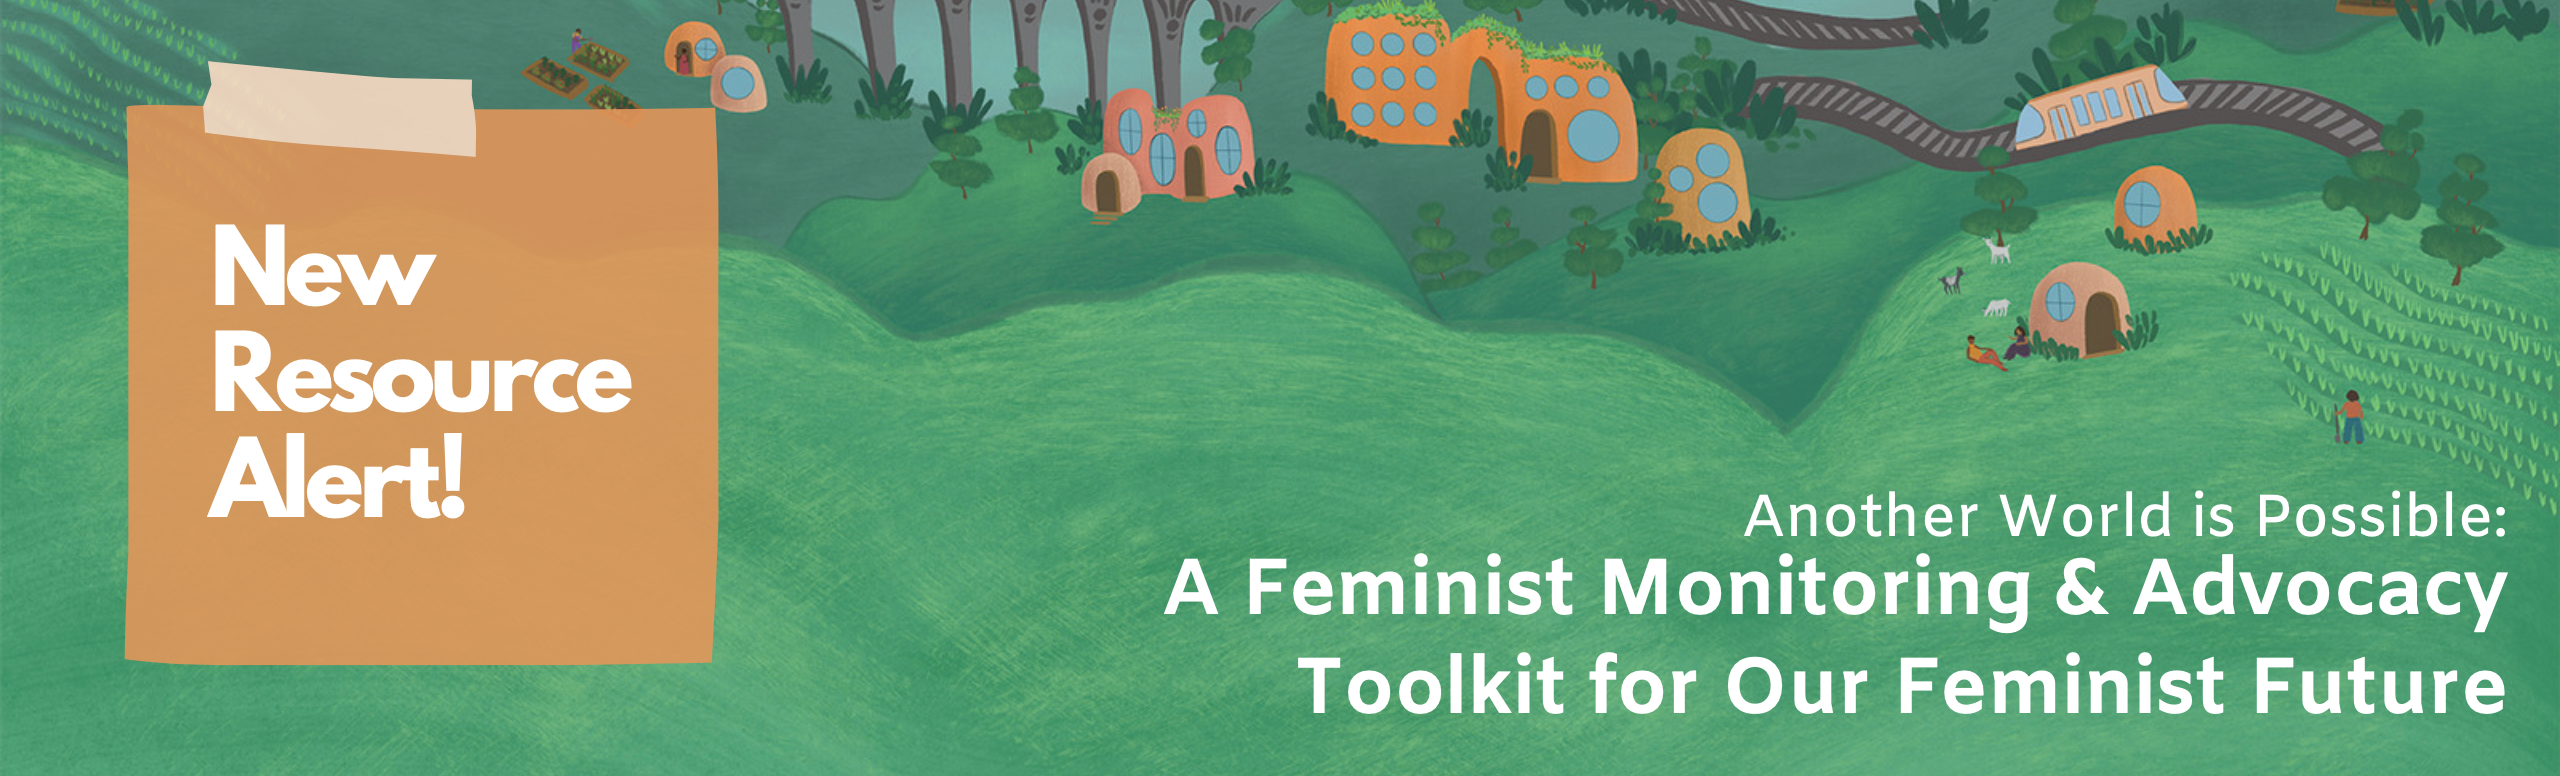 Another World is Possible: A Feminist Monitoring & Advocacy Toolkit for Our Feminist Future